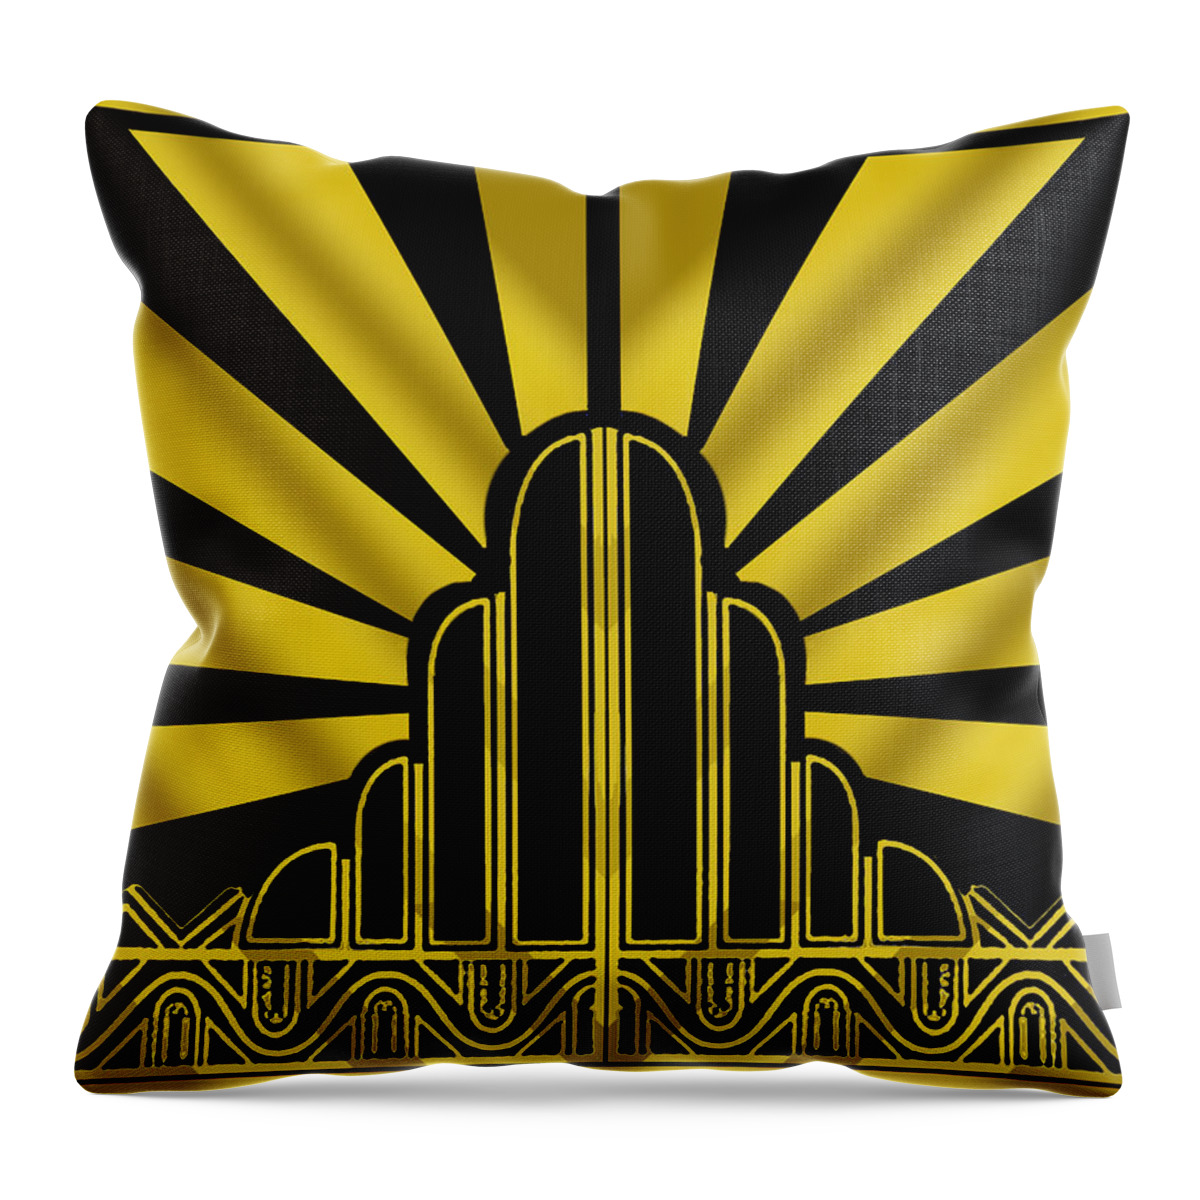 Art Deco Poster Throw Pillow featuring the digital art Art Deco Poster - Two by Chuck Staley